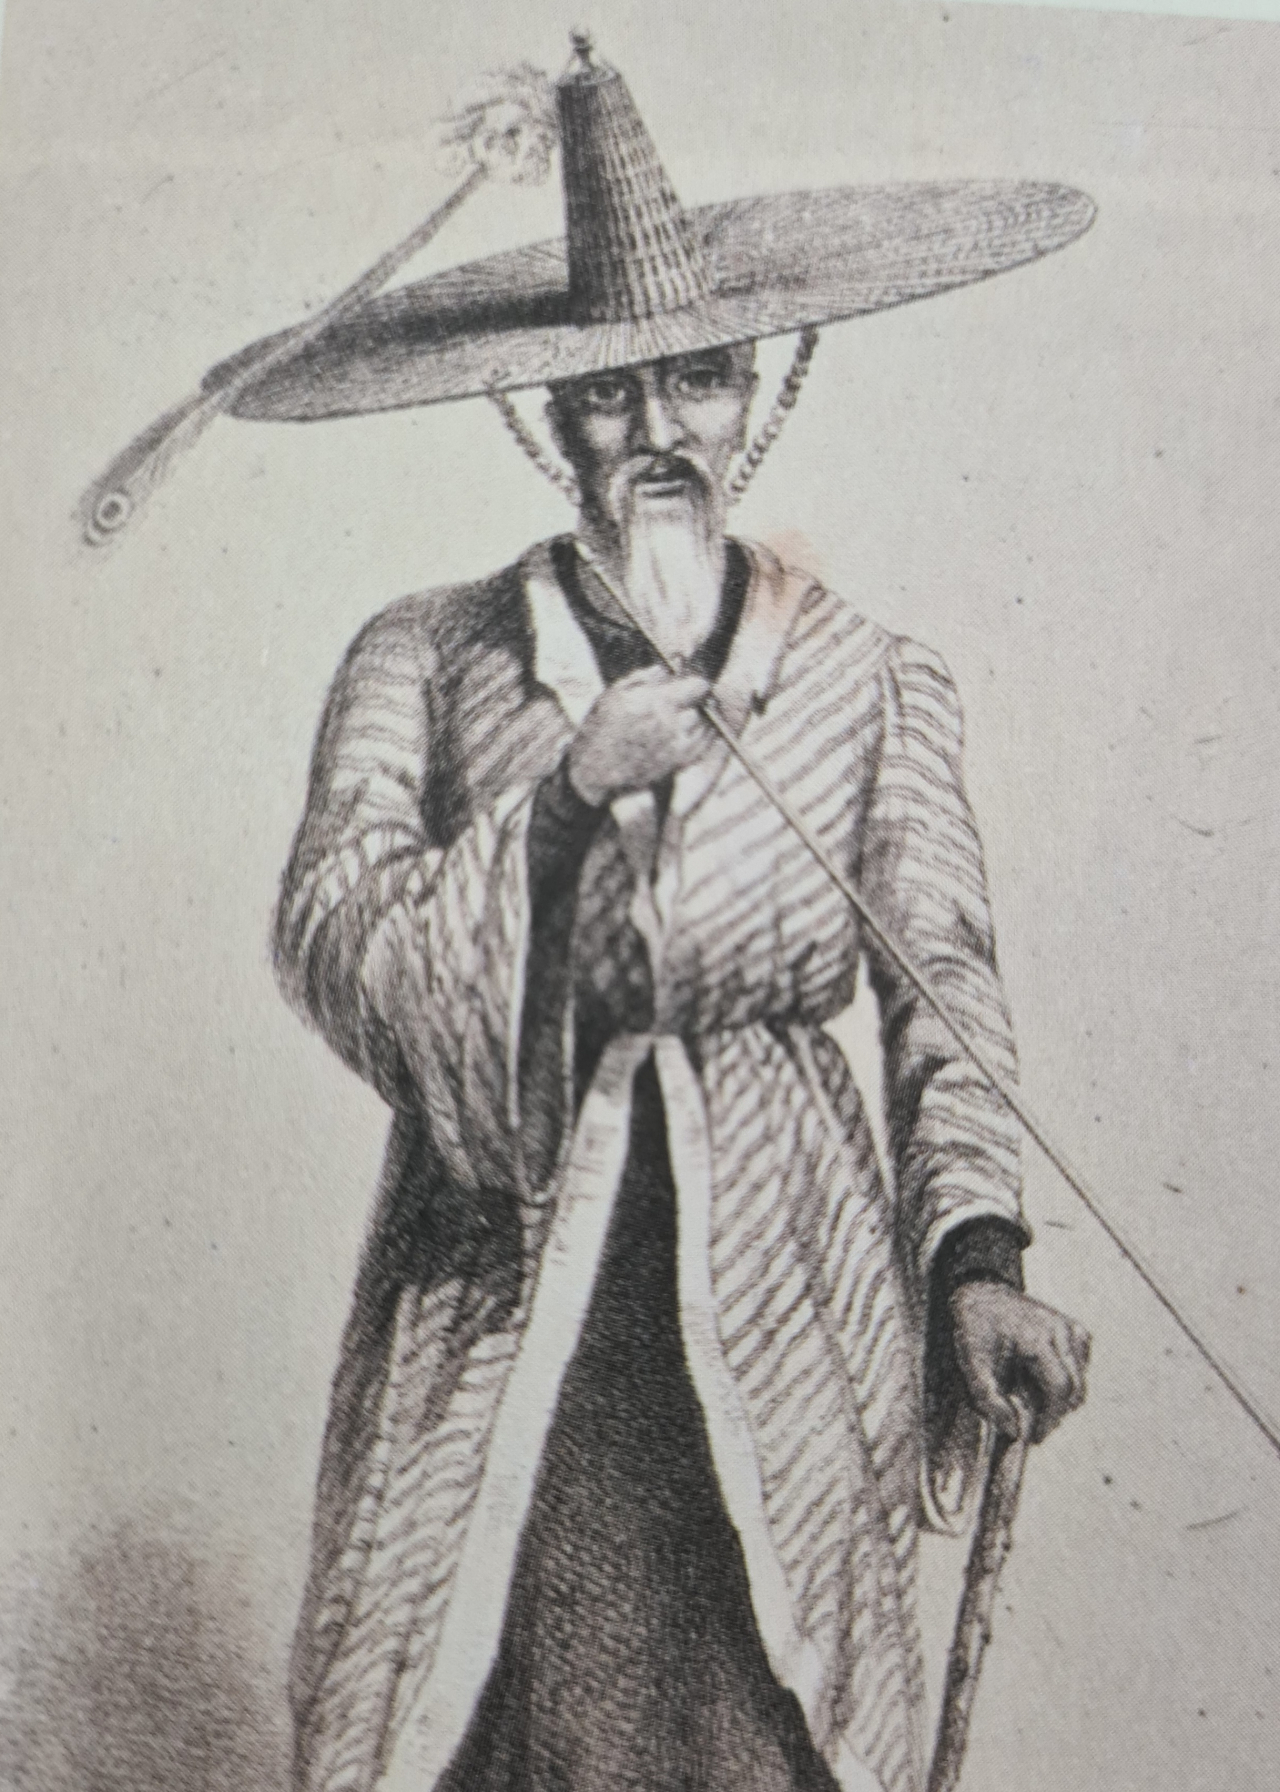 An artist's rendering of a local official of Jeju Island, taken from the book 